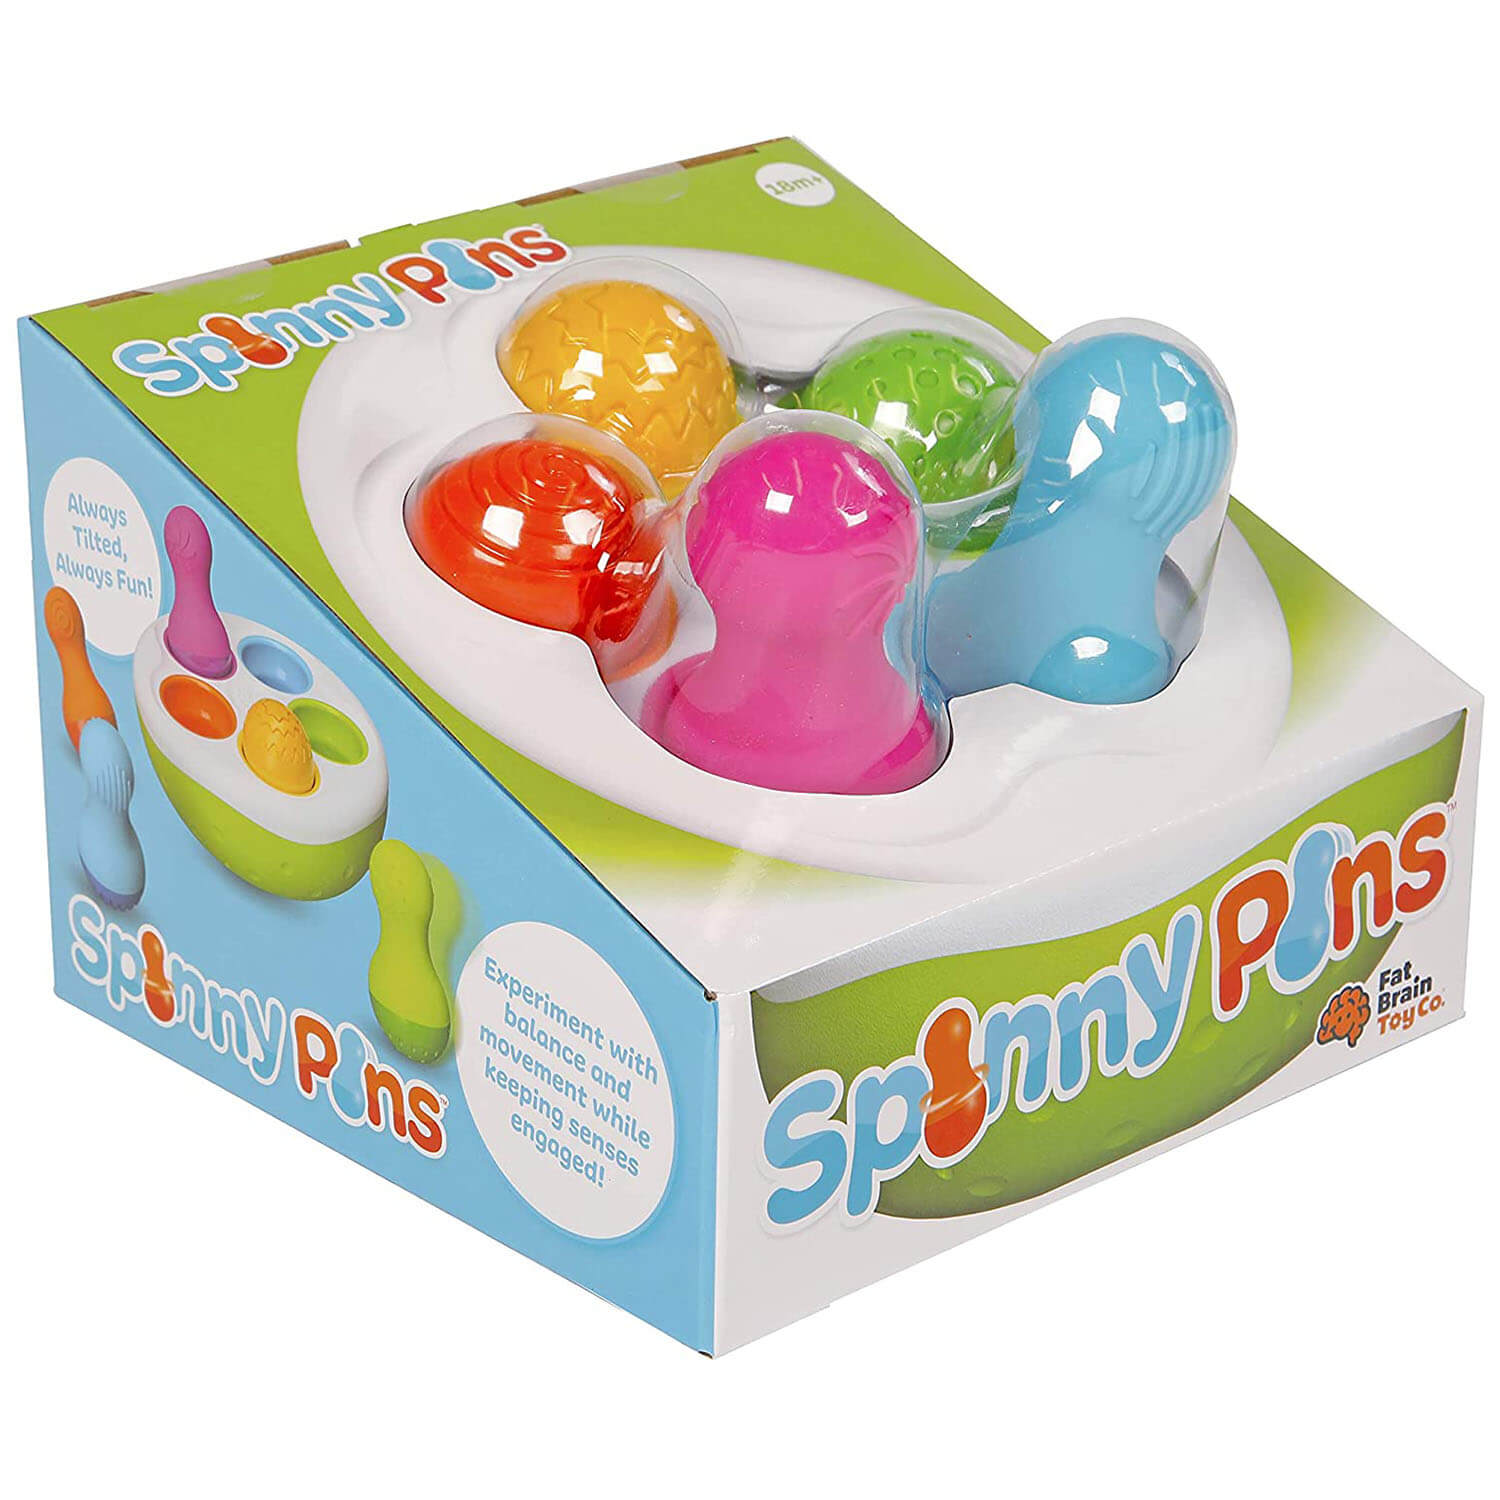 Front view of the baby toy packaging.